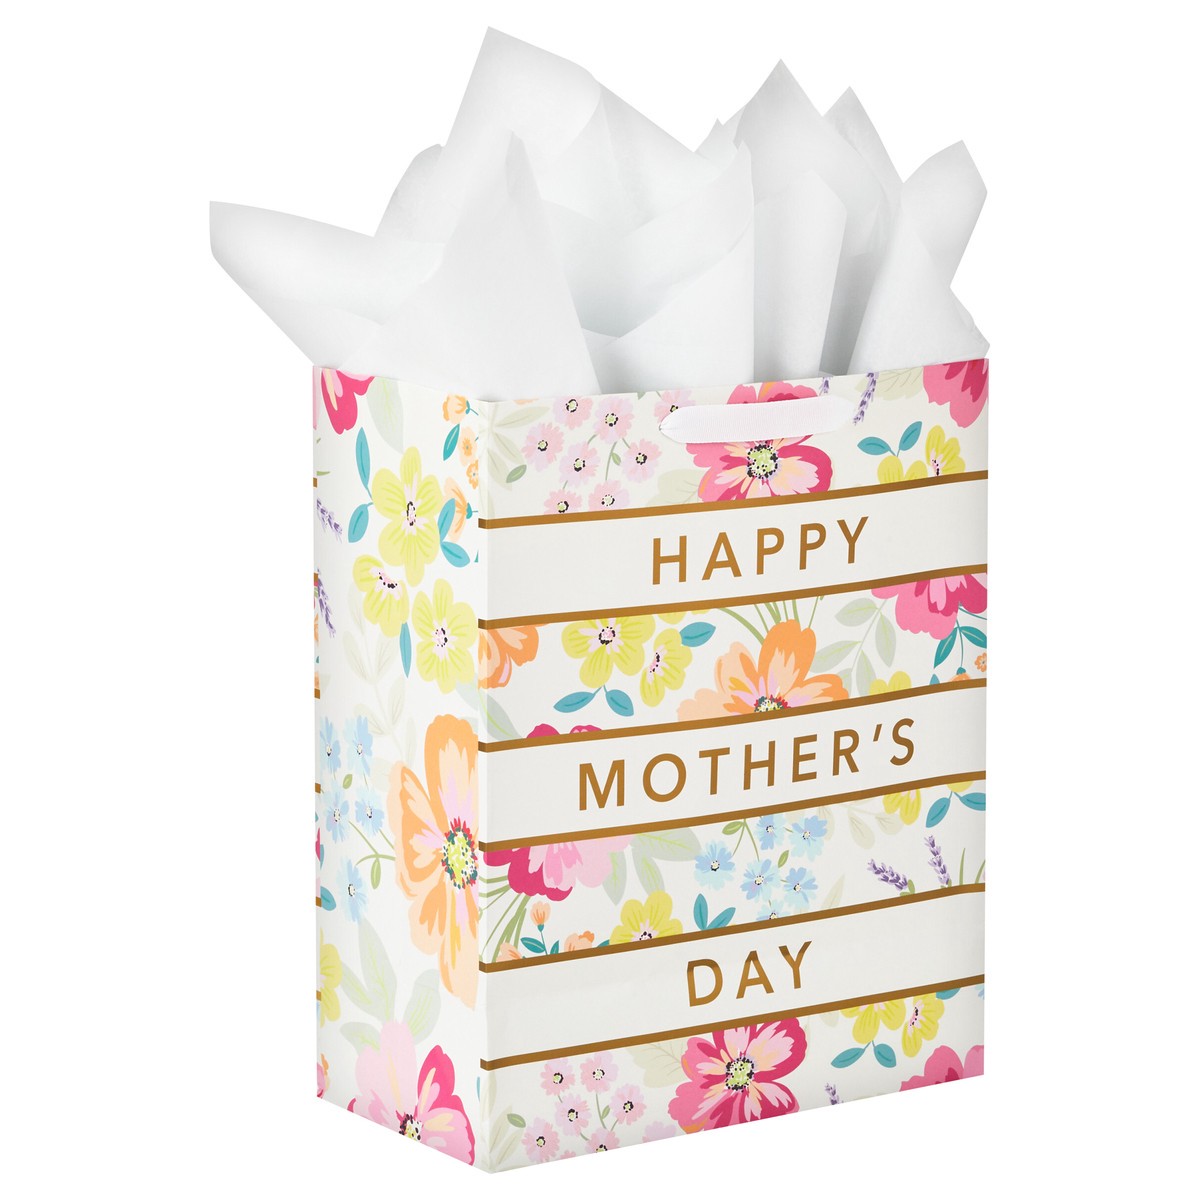 Mother's Day Gift Ideas. - The Stripe